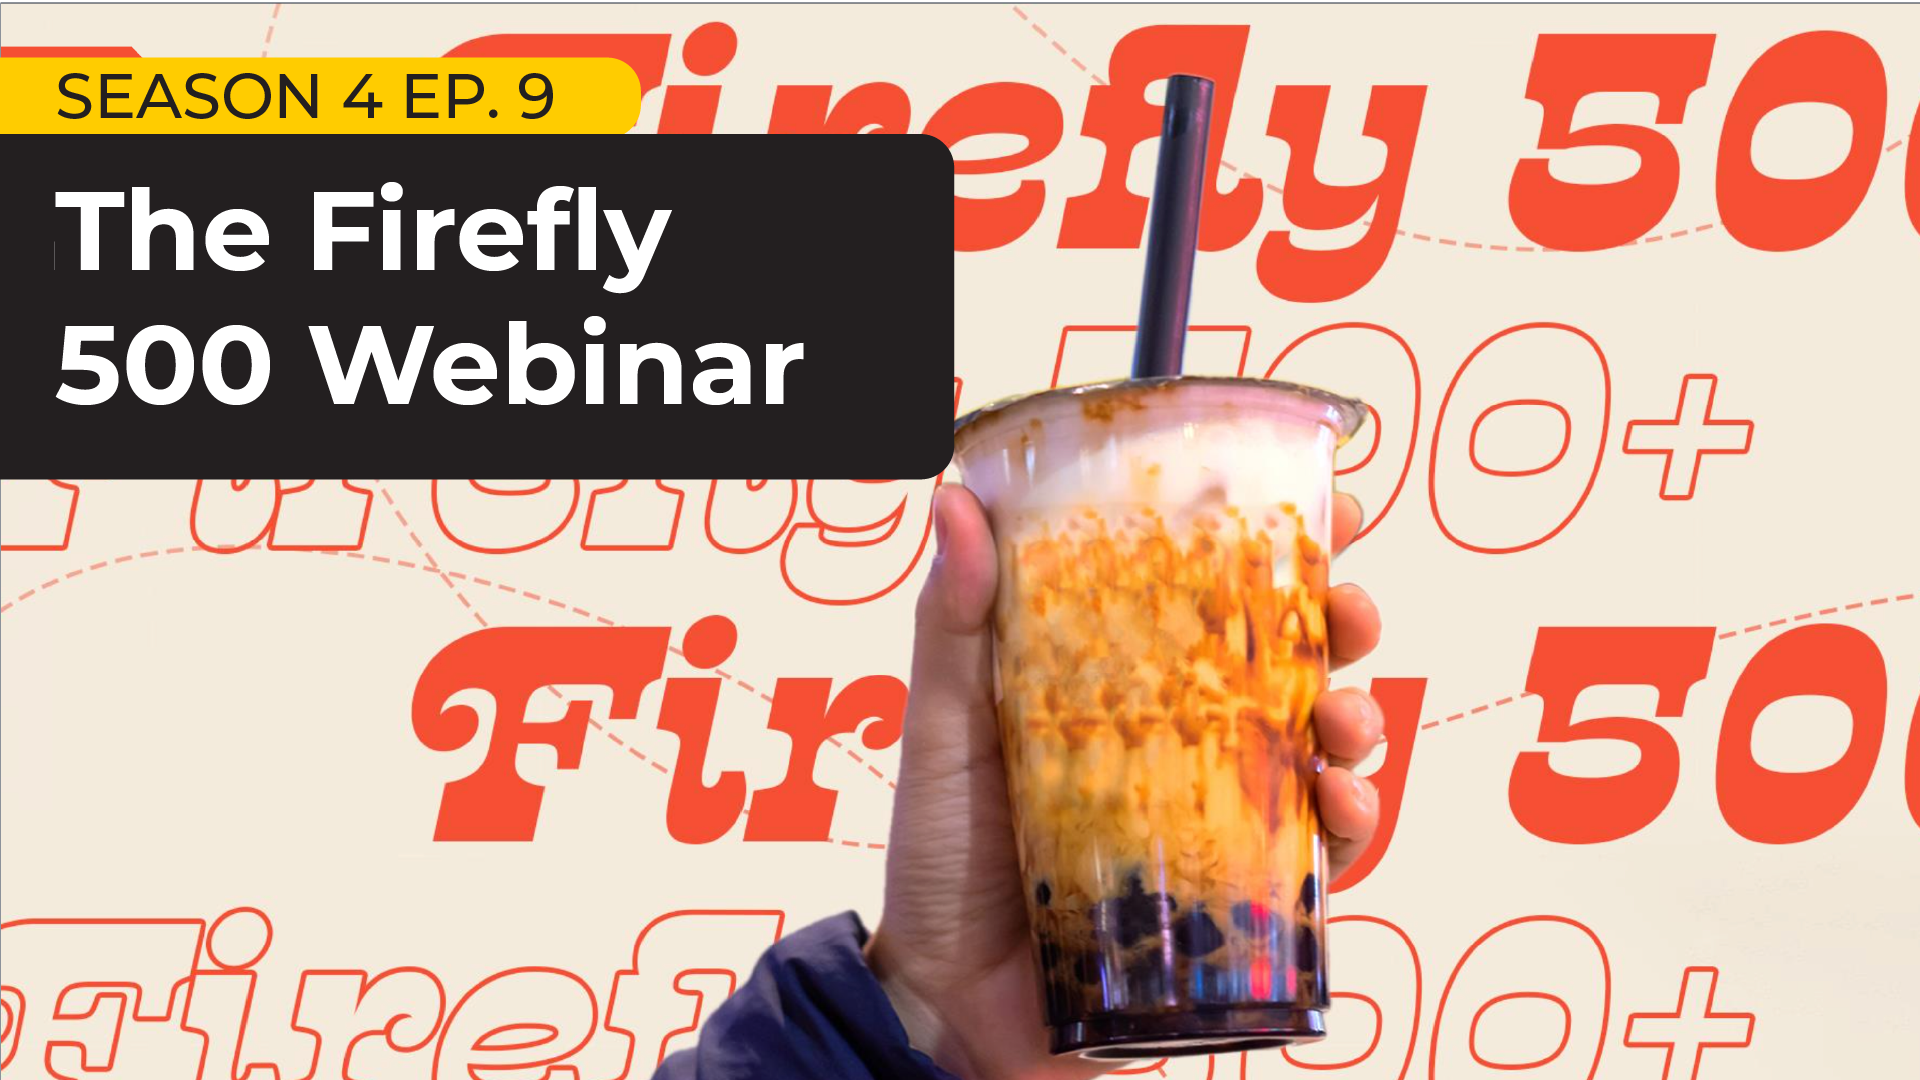 The Datassential team shares a sneak peek of The Firefly 500+ Report — a comprehensive look at the restaurant landscape and ranking of the largest 500 restaurant chains.